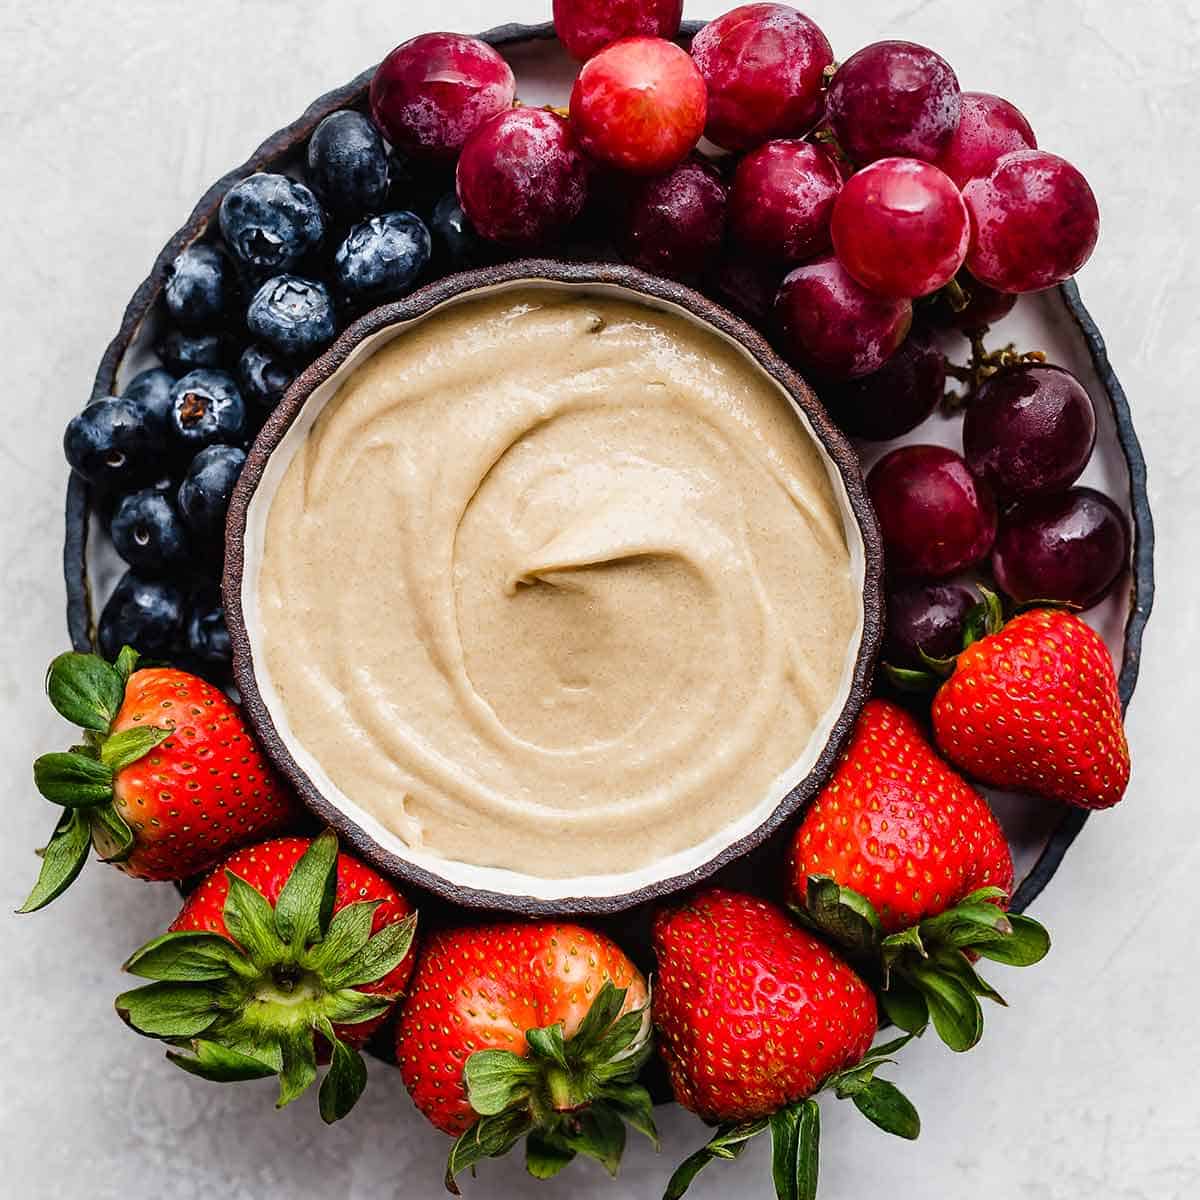 Cream Cheese Fruit Dip surrounded by grapes, strawberries, and blueberries.